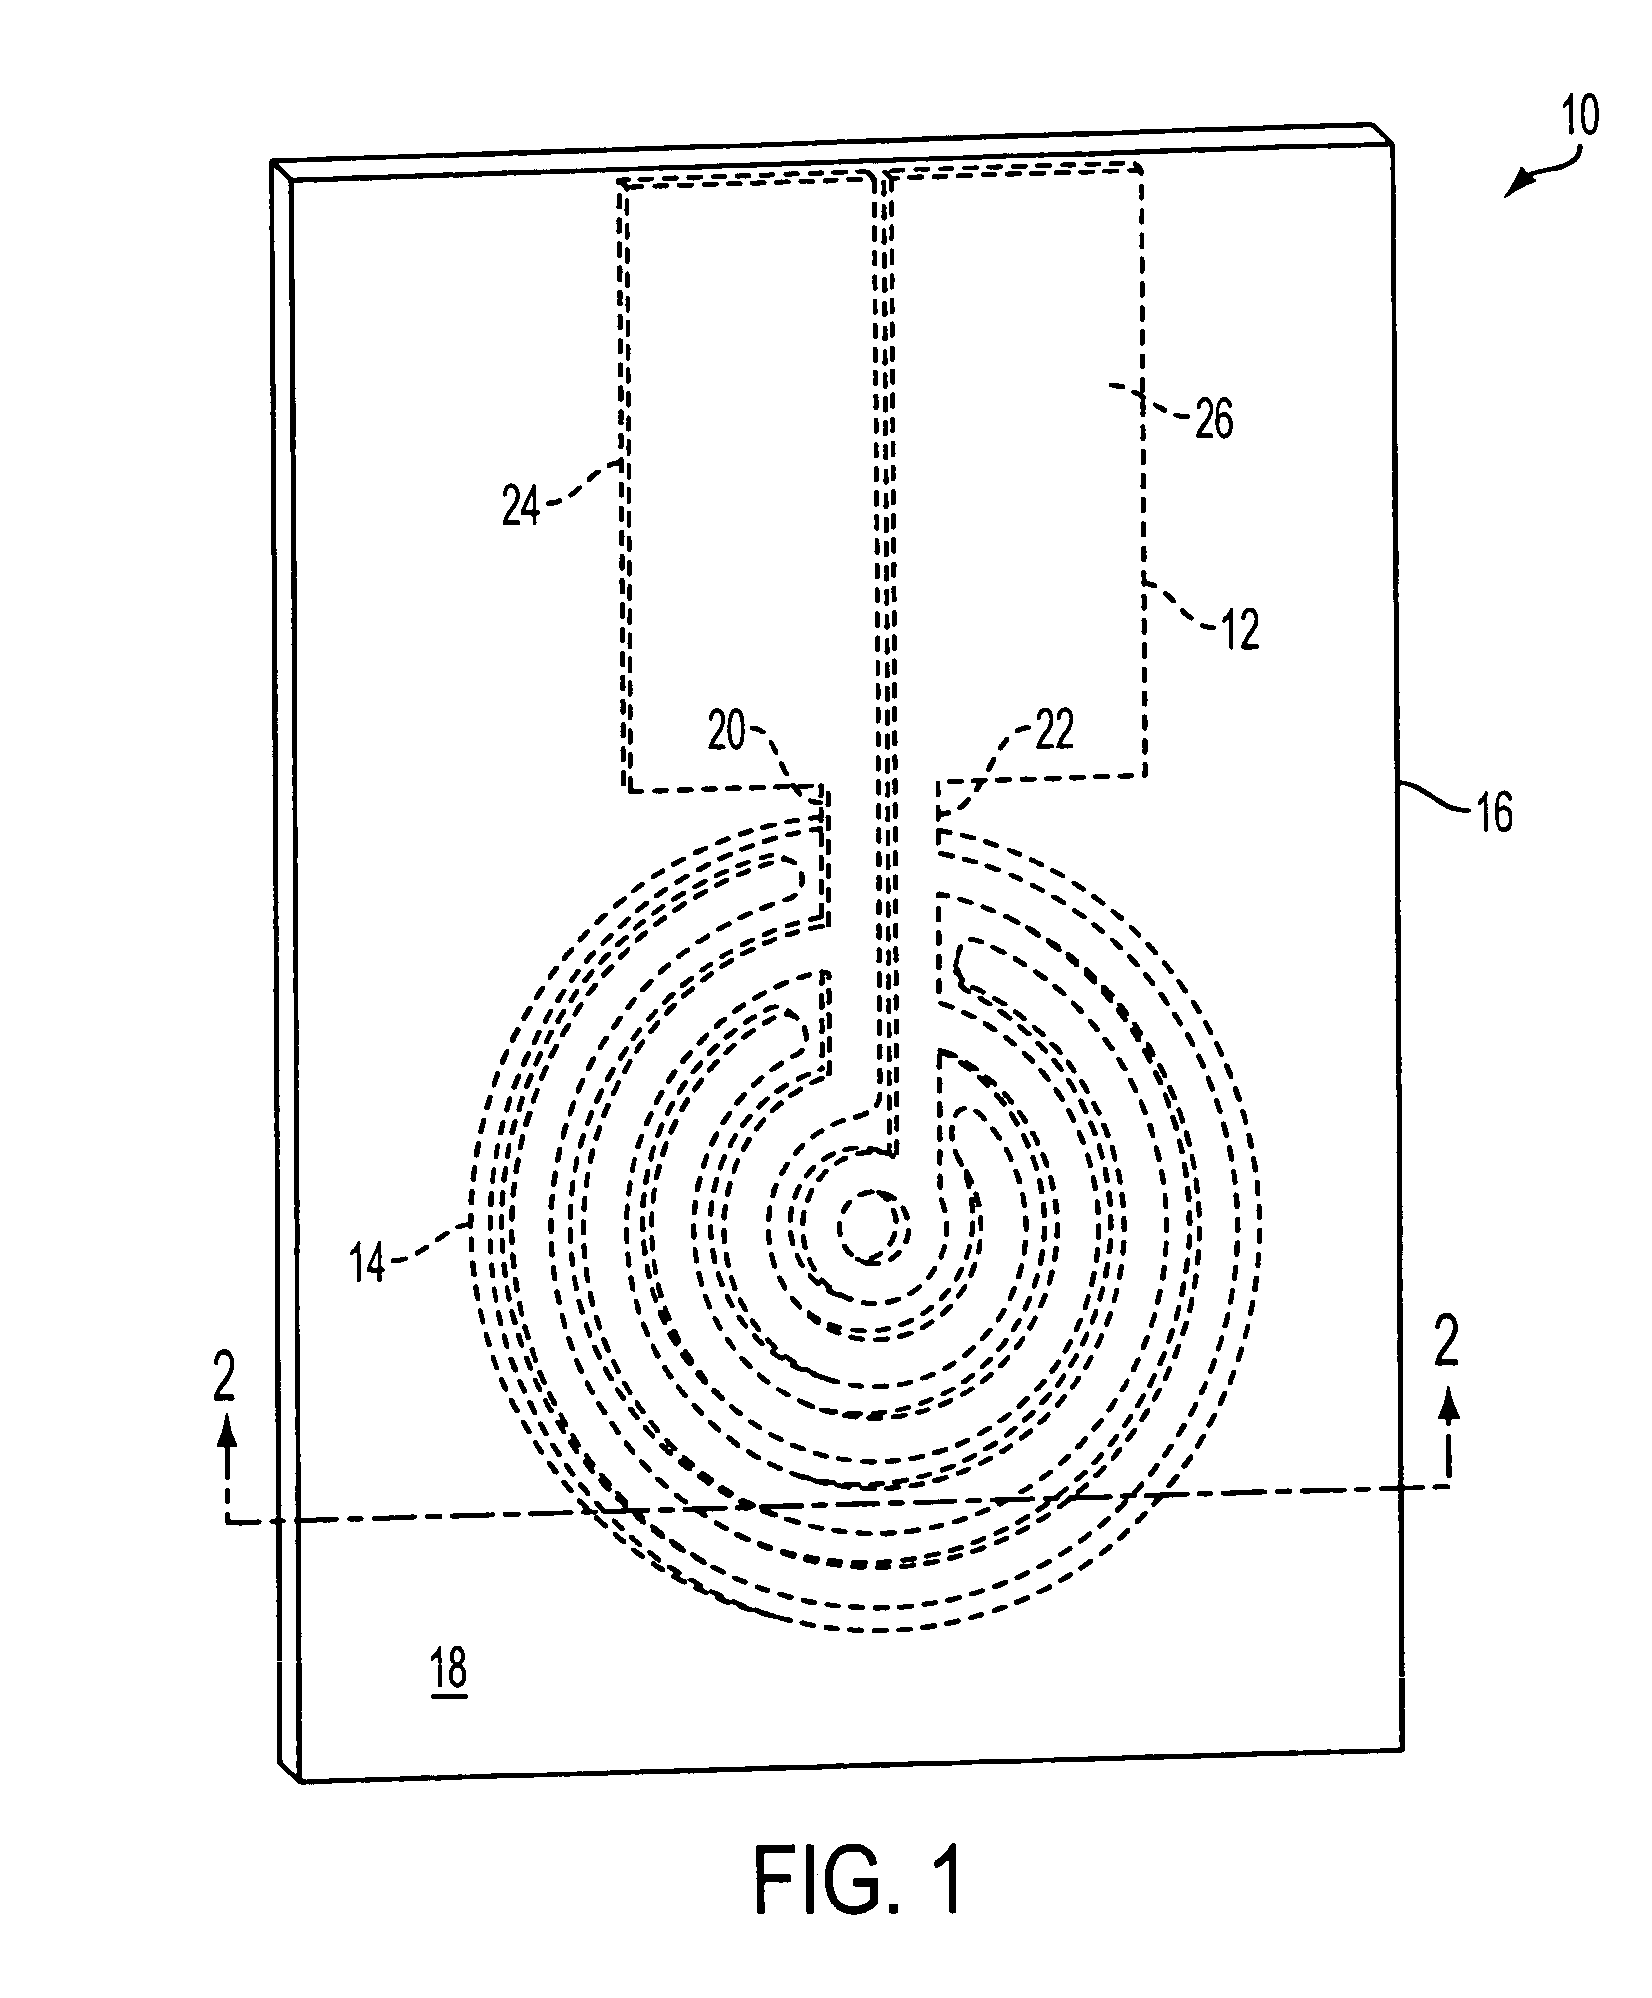 Apparatus and method for heating microfluidic volumes and moving fluids